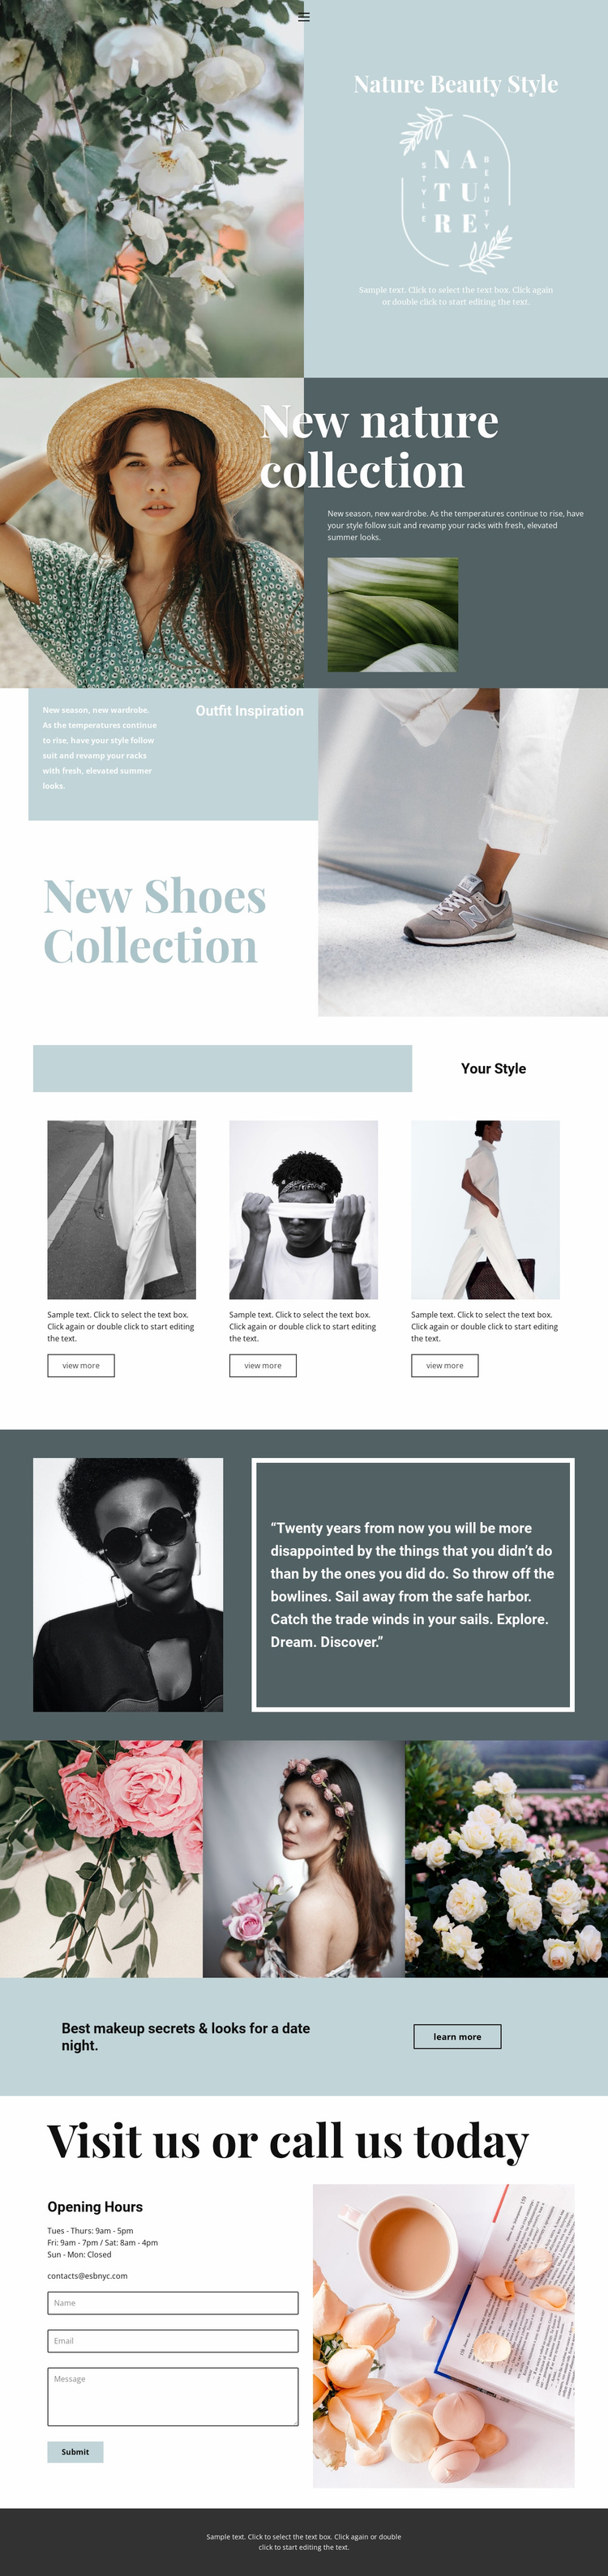 Nature collection Website Template